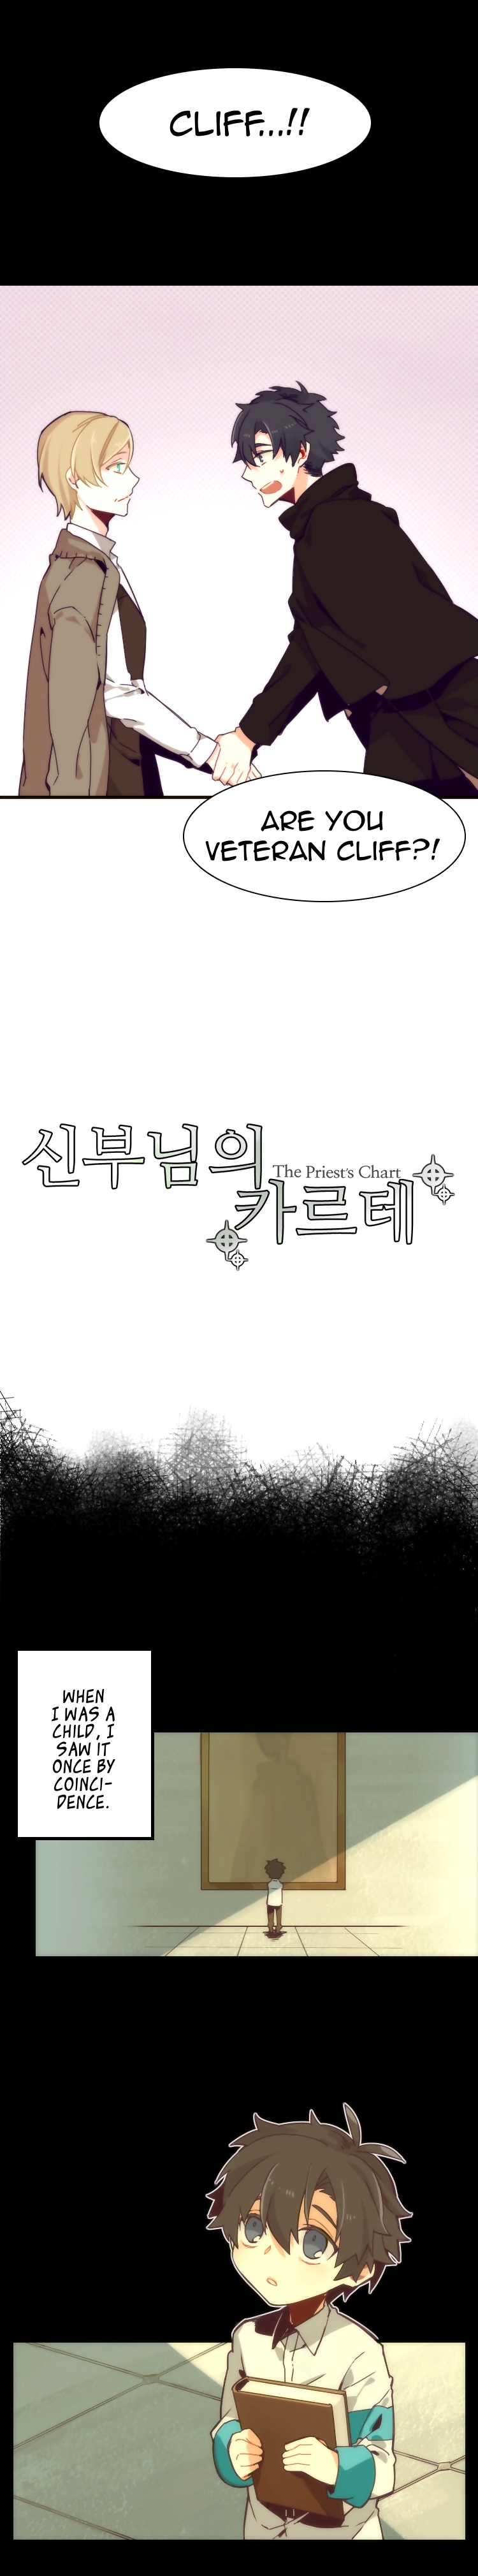 The Priest's Chart Ch.2